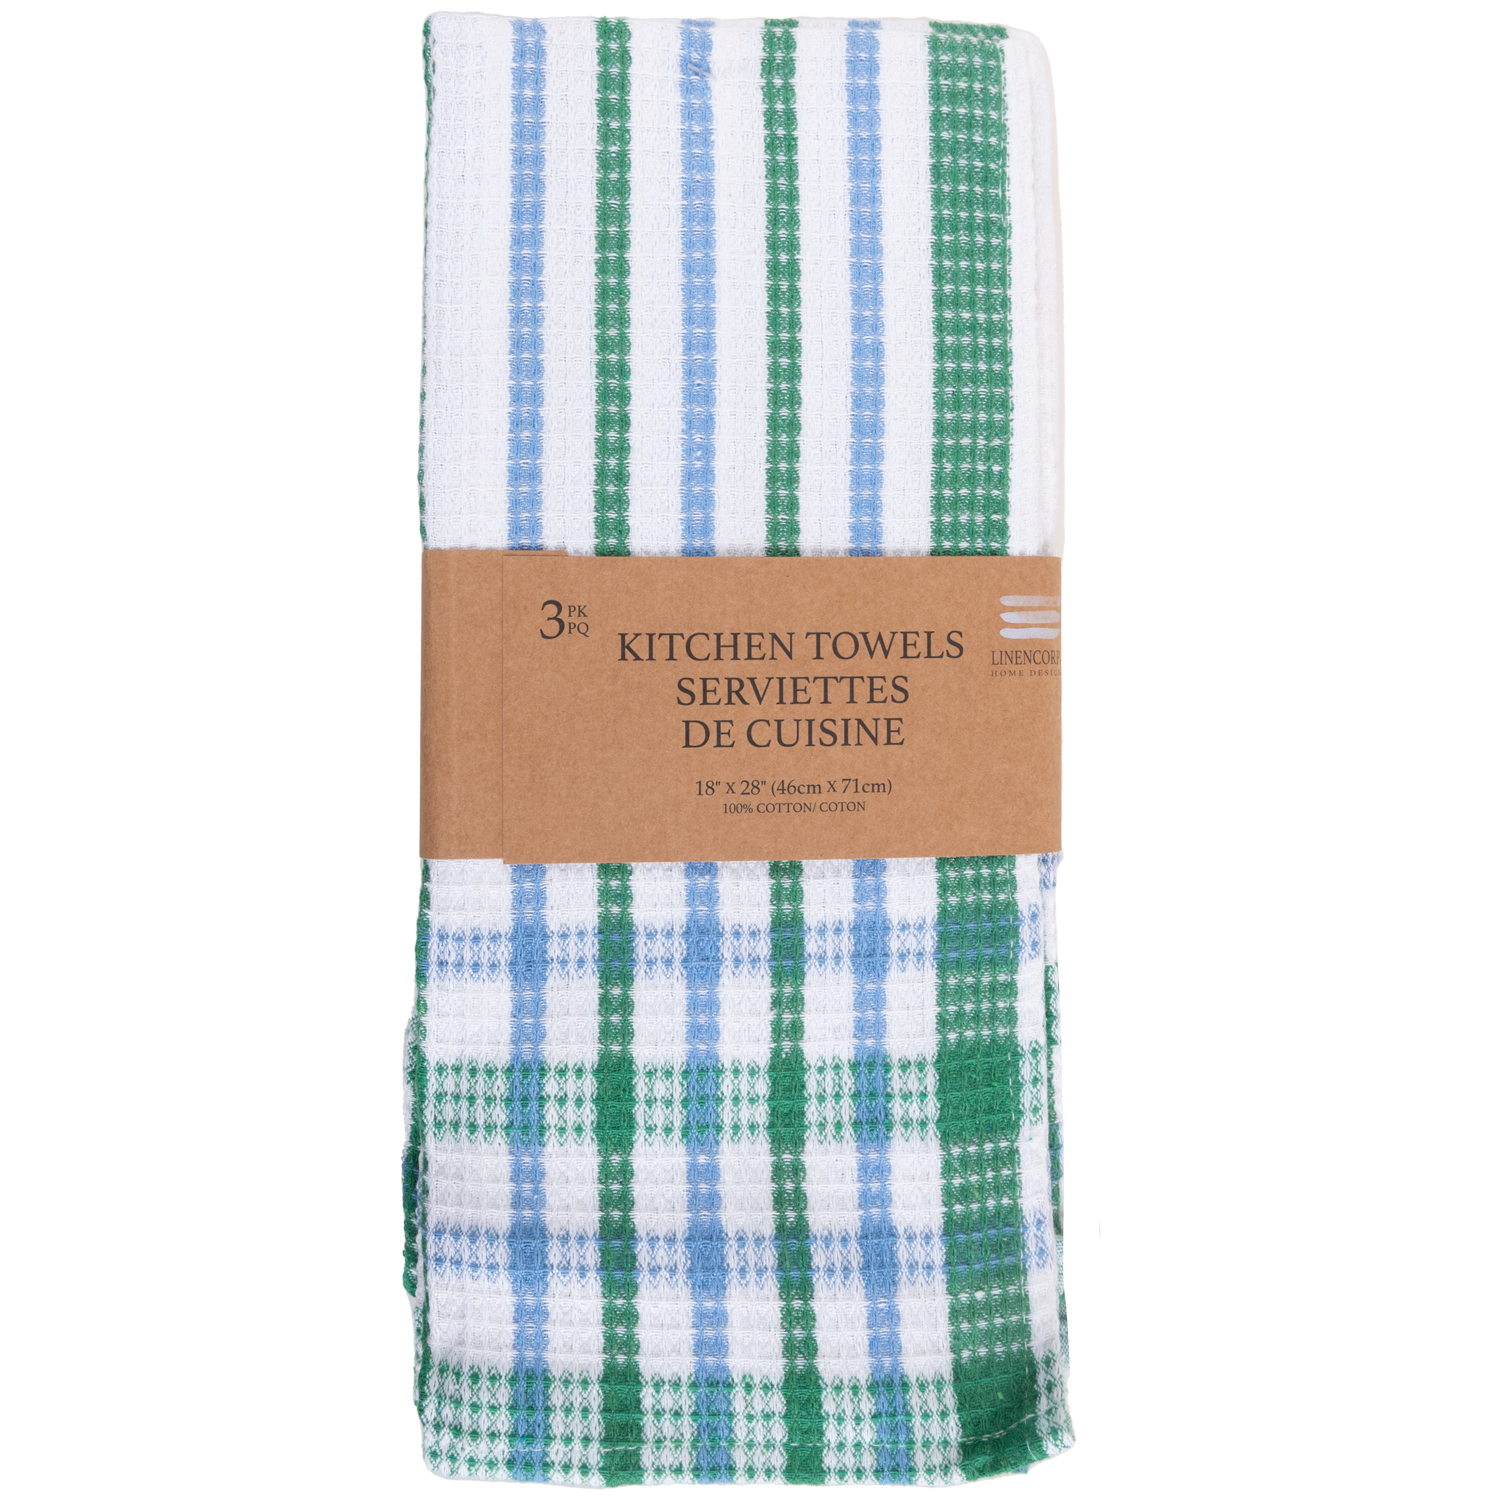 Kitchen towels, pk. of 3